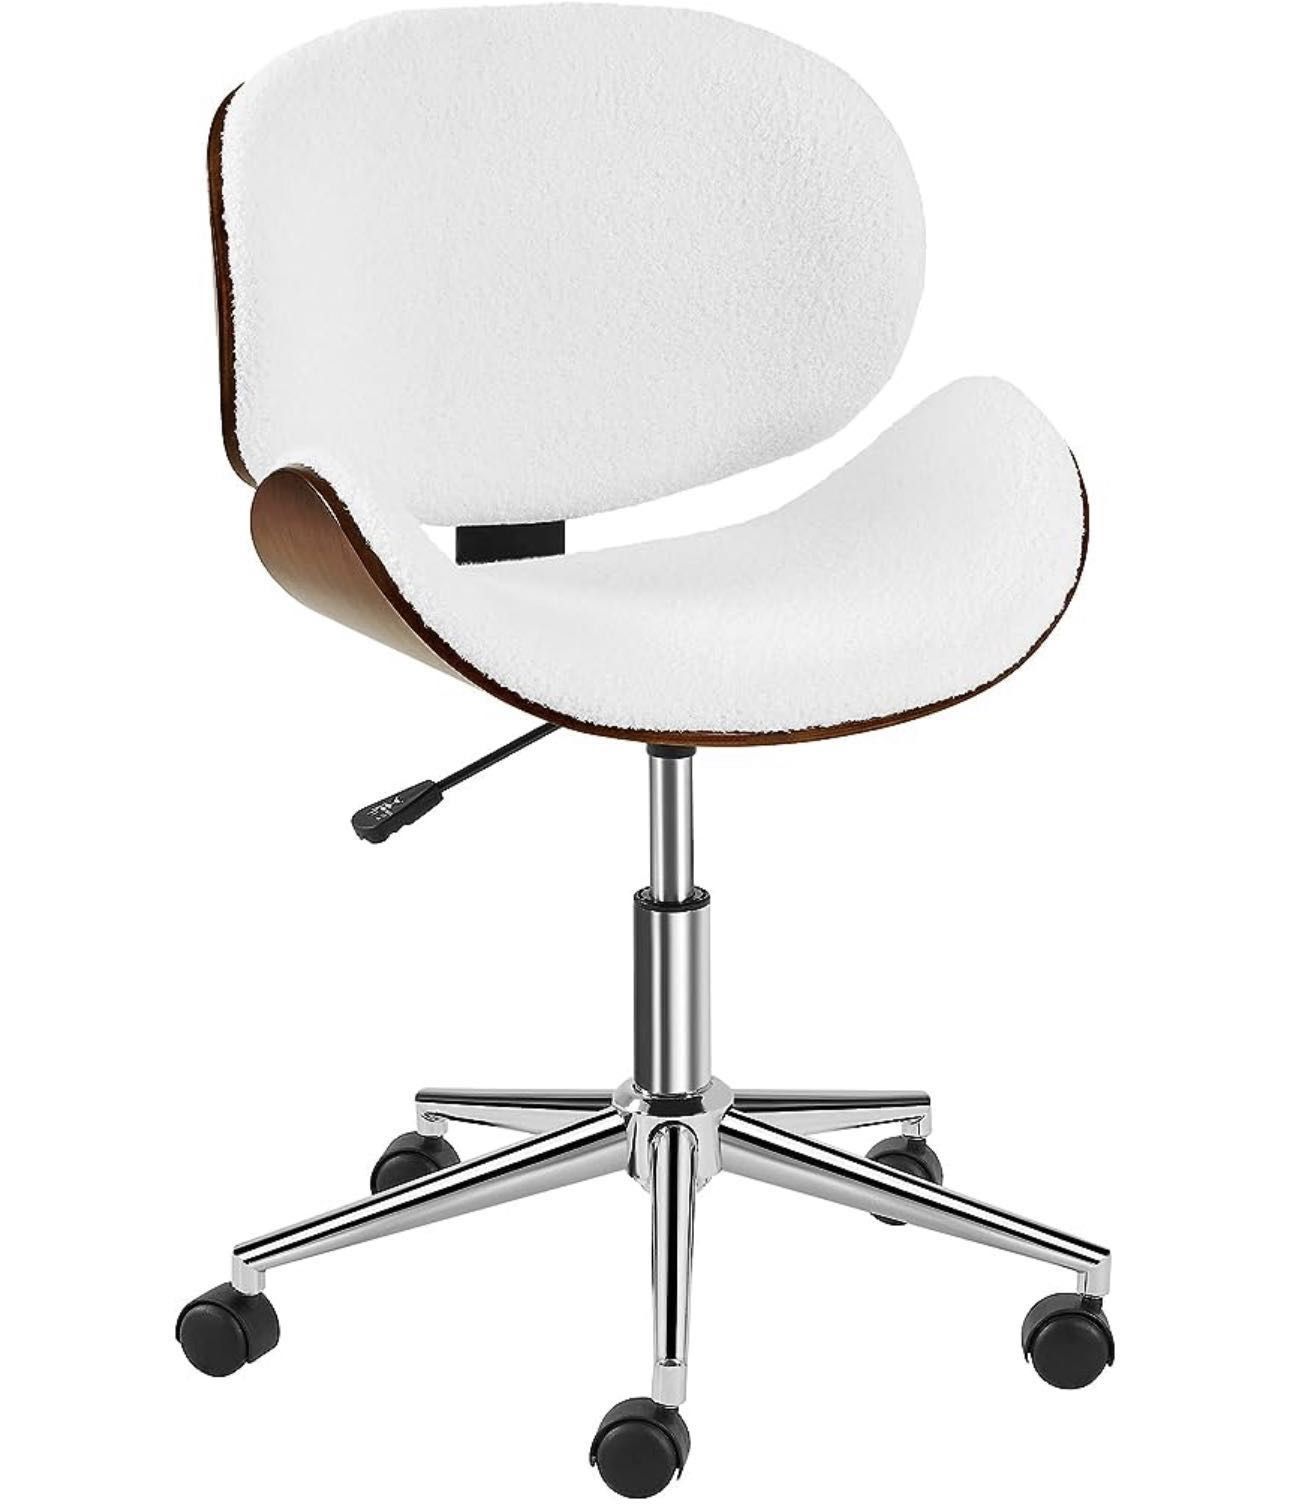 Ergonomic Desk Chair Armless Office Chair Mid-Century Bentwood Seat Computer Chair Boucle Fabric Swivel Chair Height Adjustable for Bar Meeting Room H